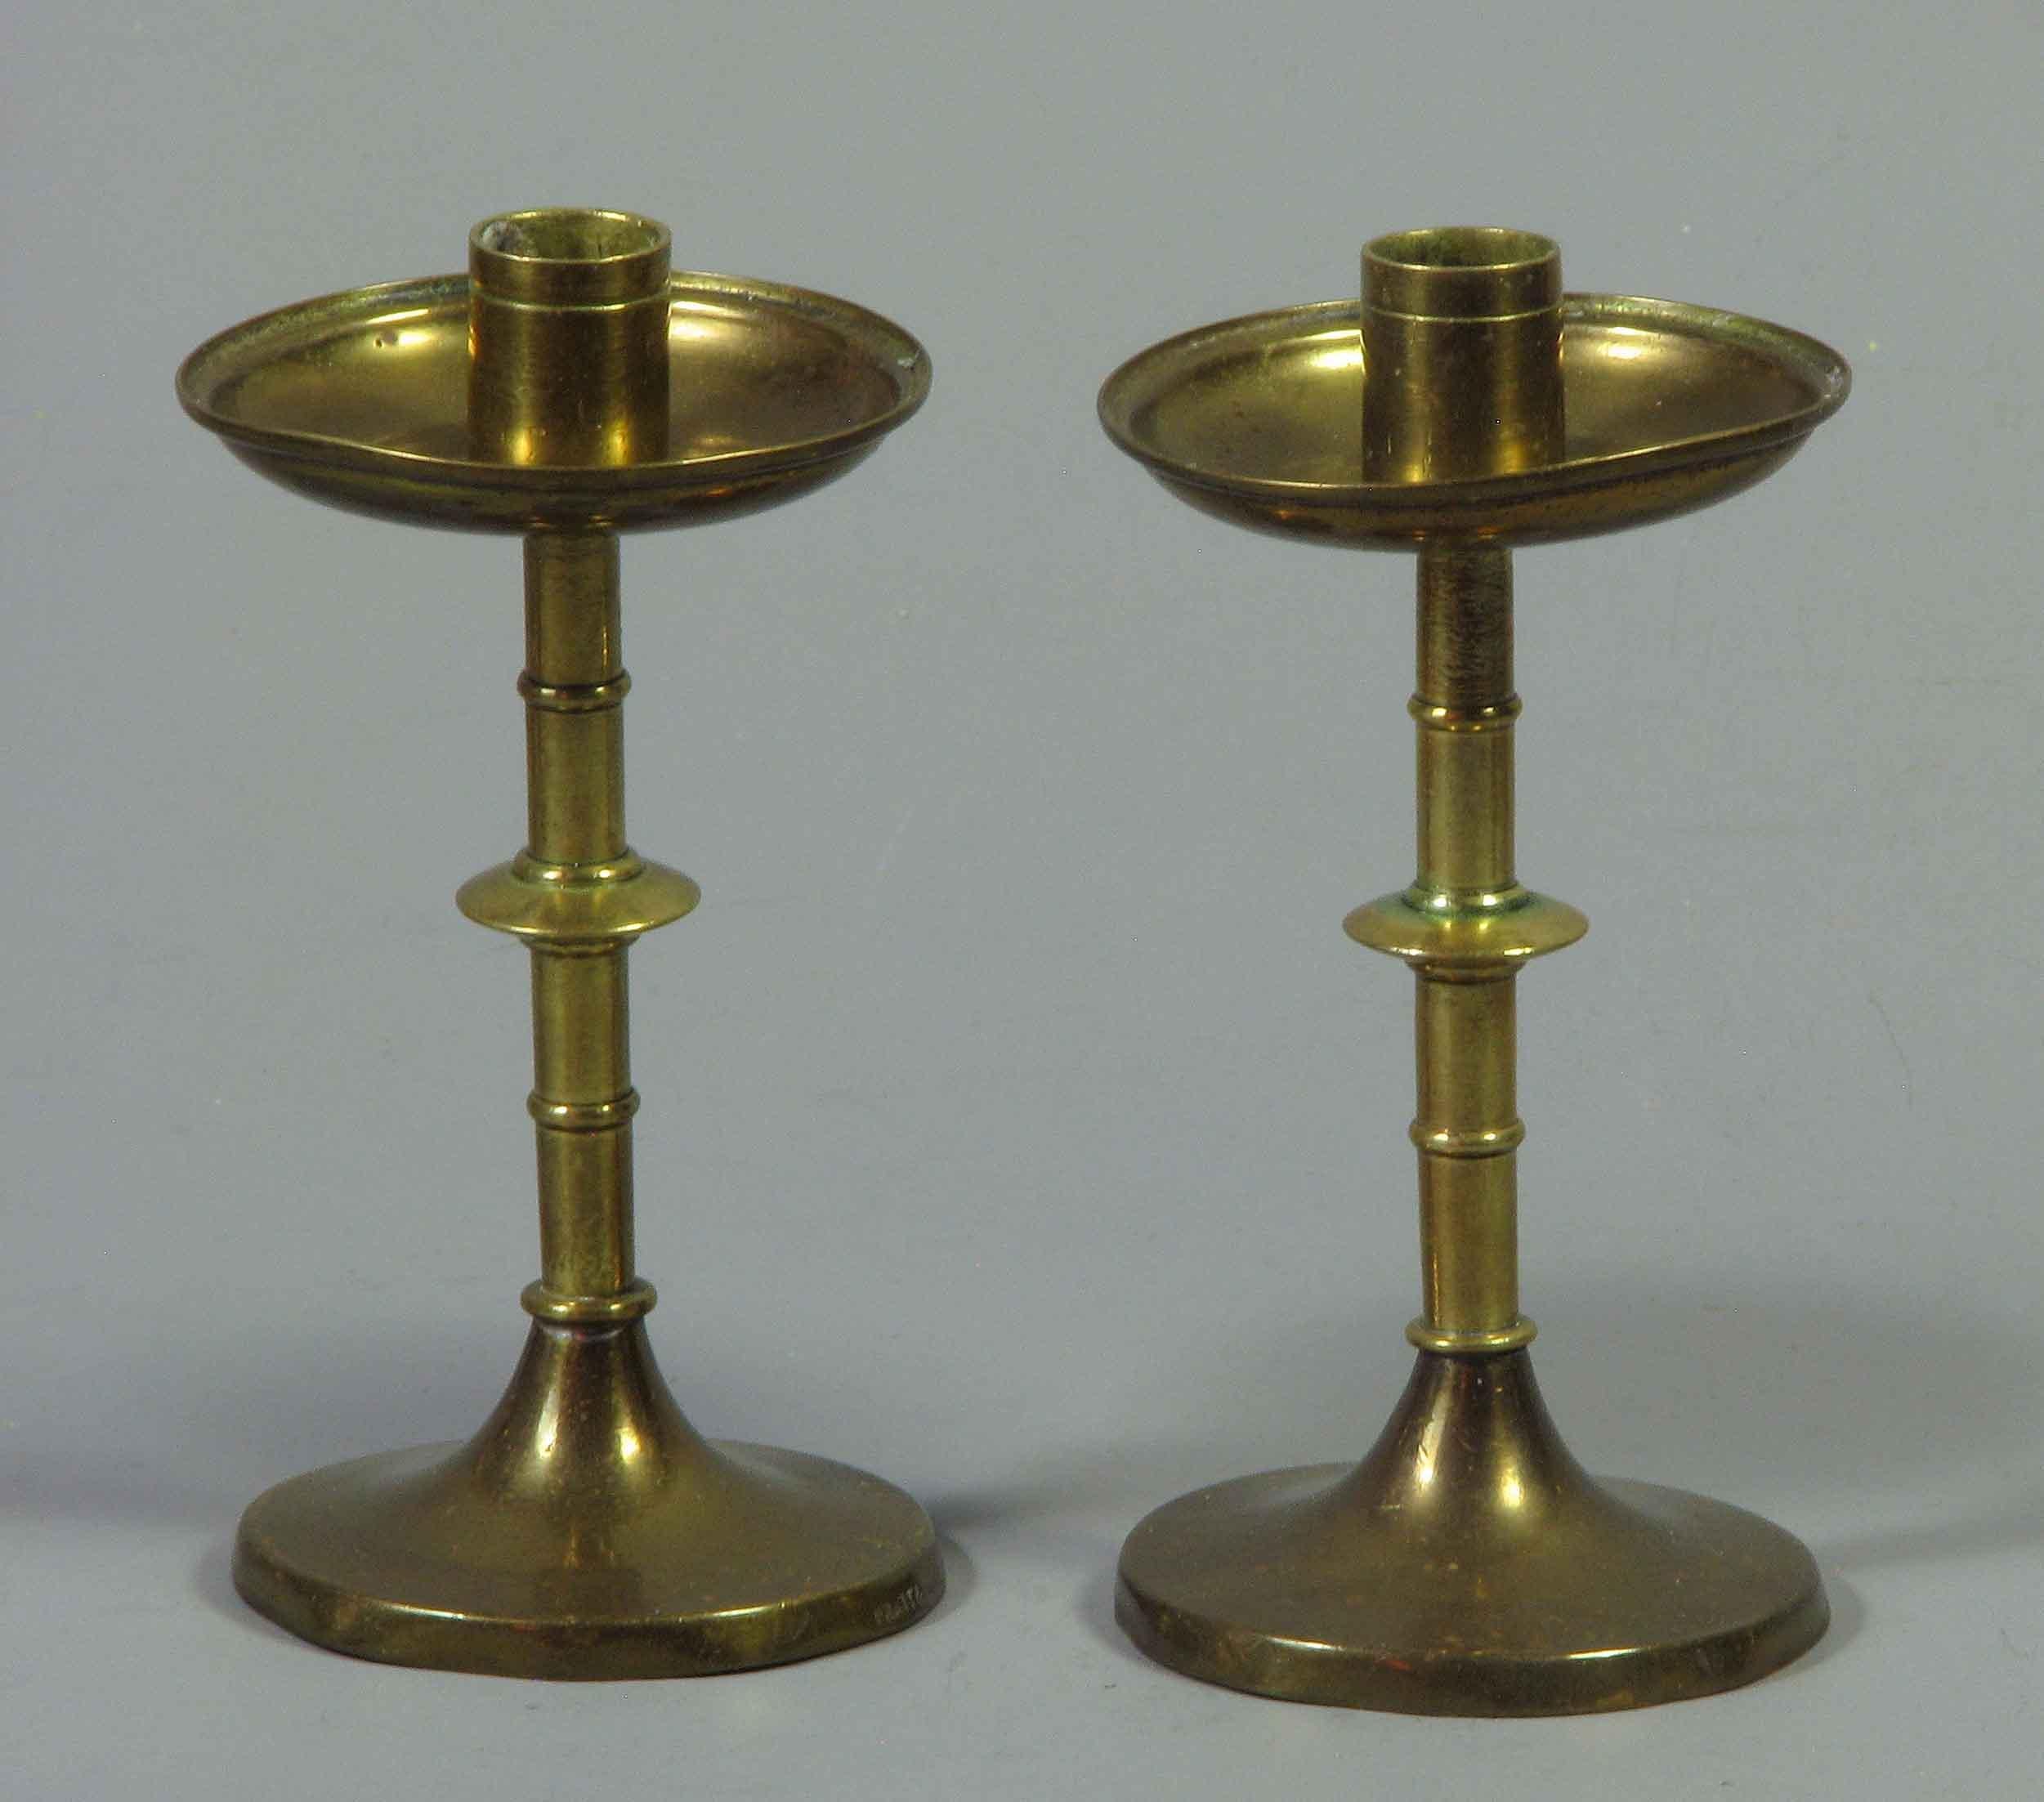 Three Pairs of Brass Candlesticks, 19th Century In Good Condition For Sale In Ottawa, Ontario